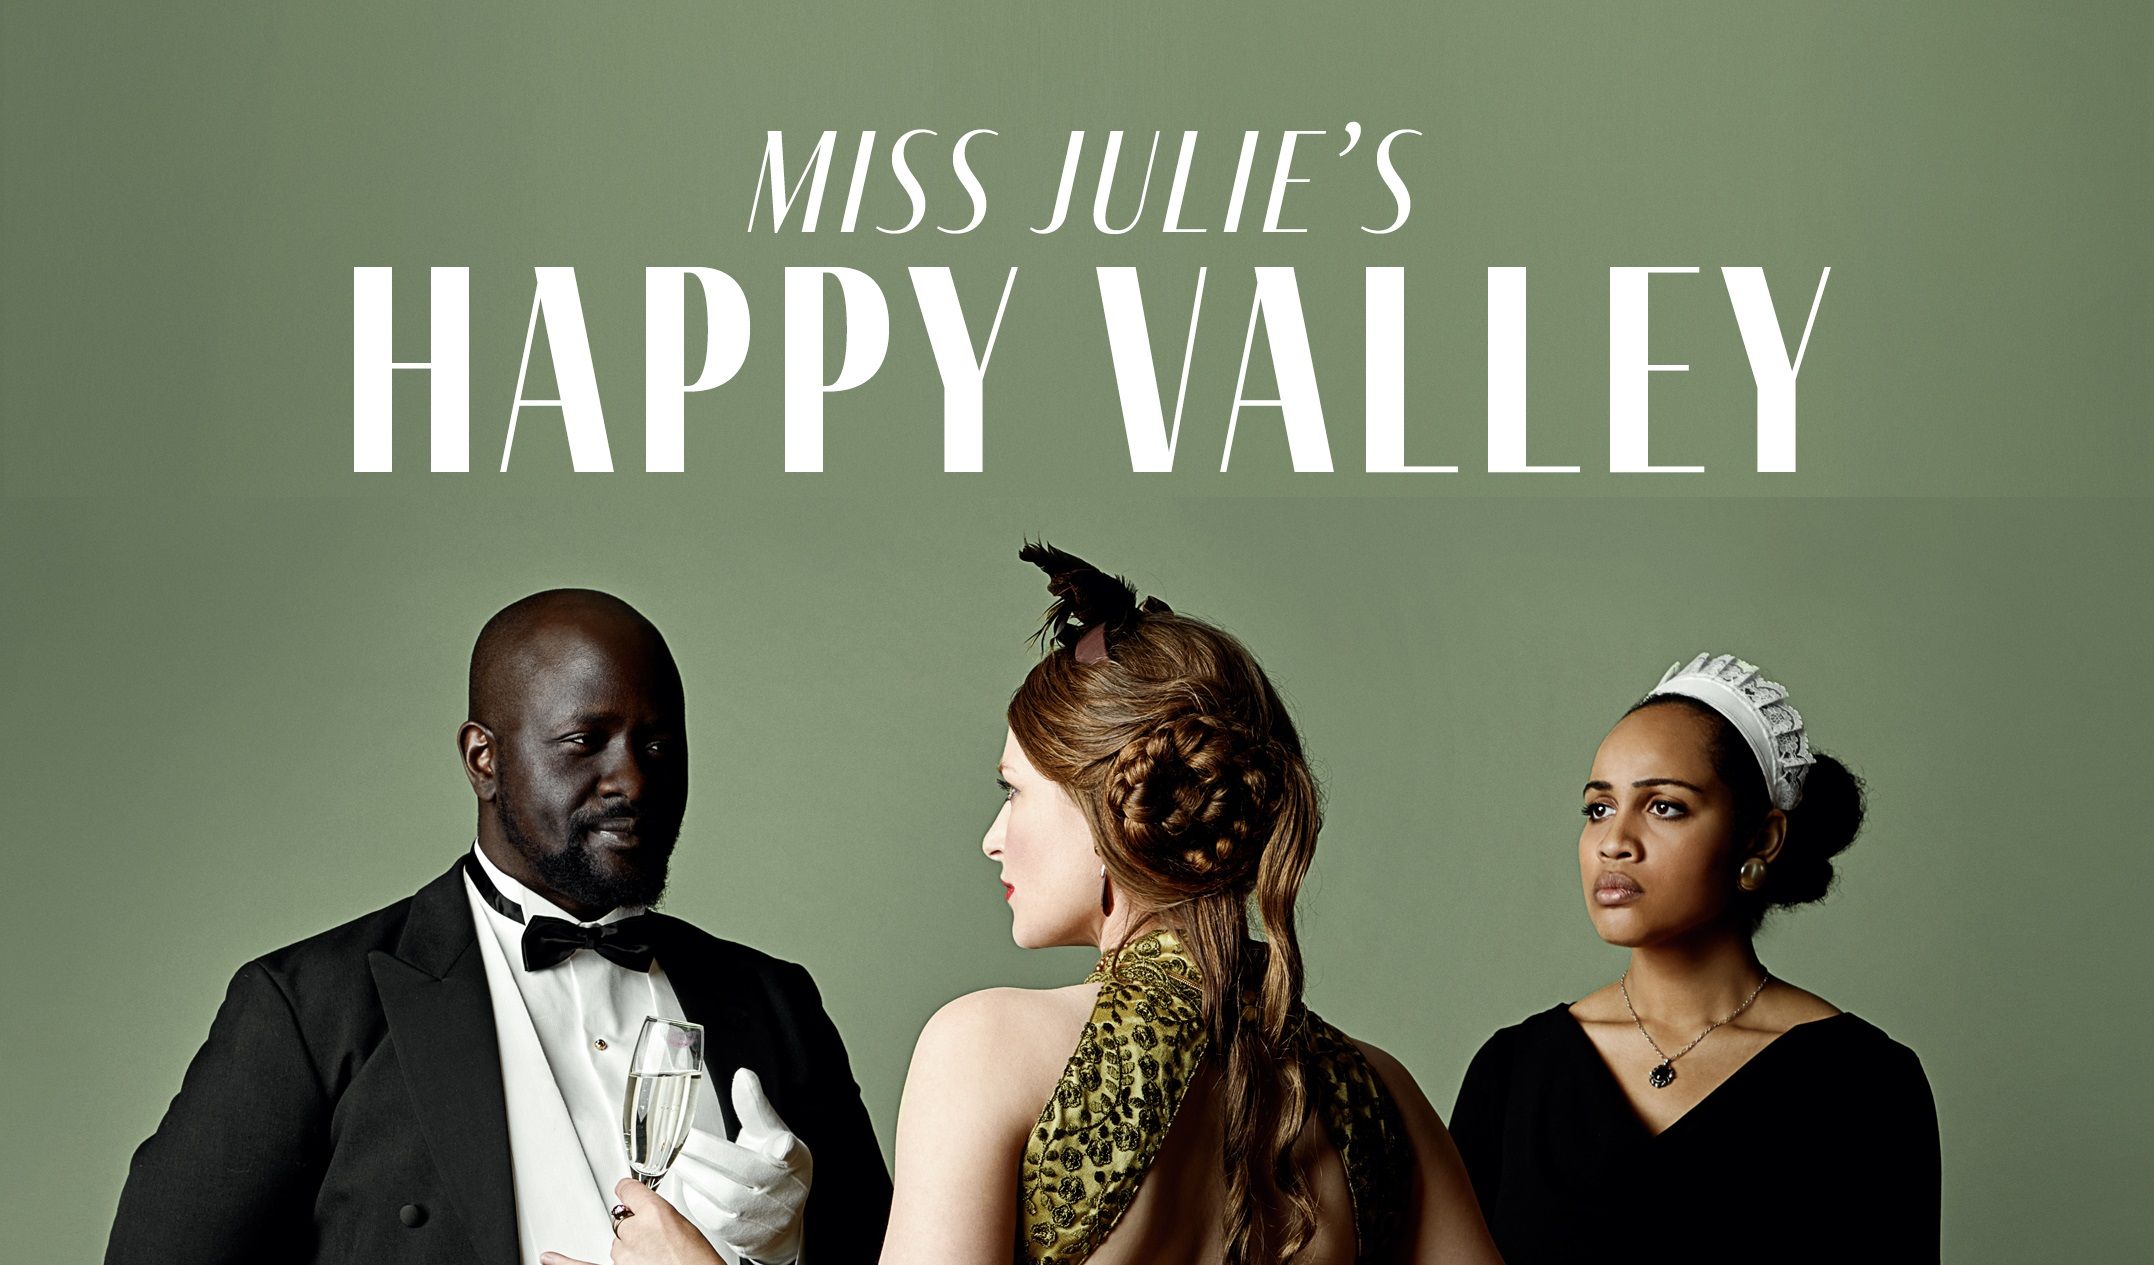 Theatre Preview: Miss Julie’s Happy Valley (Aug 26-29)